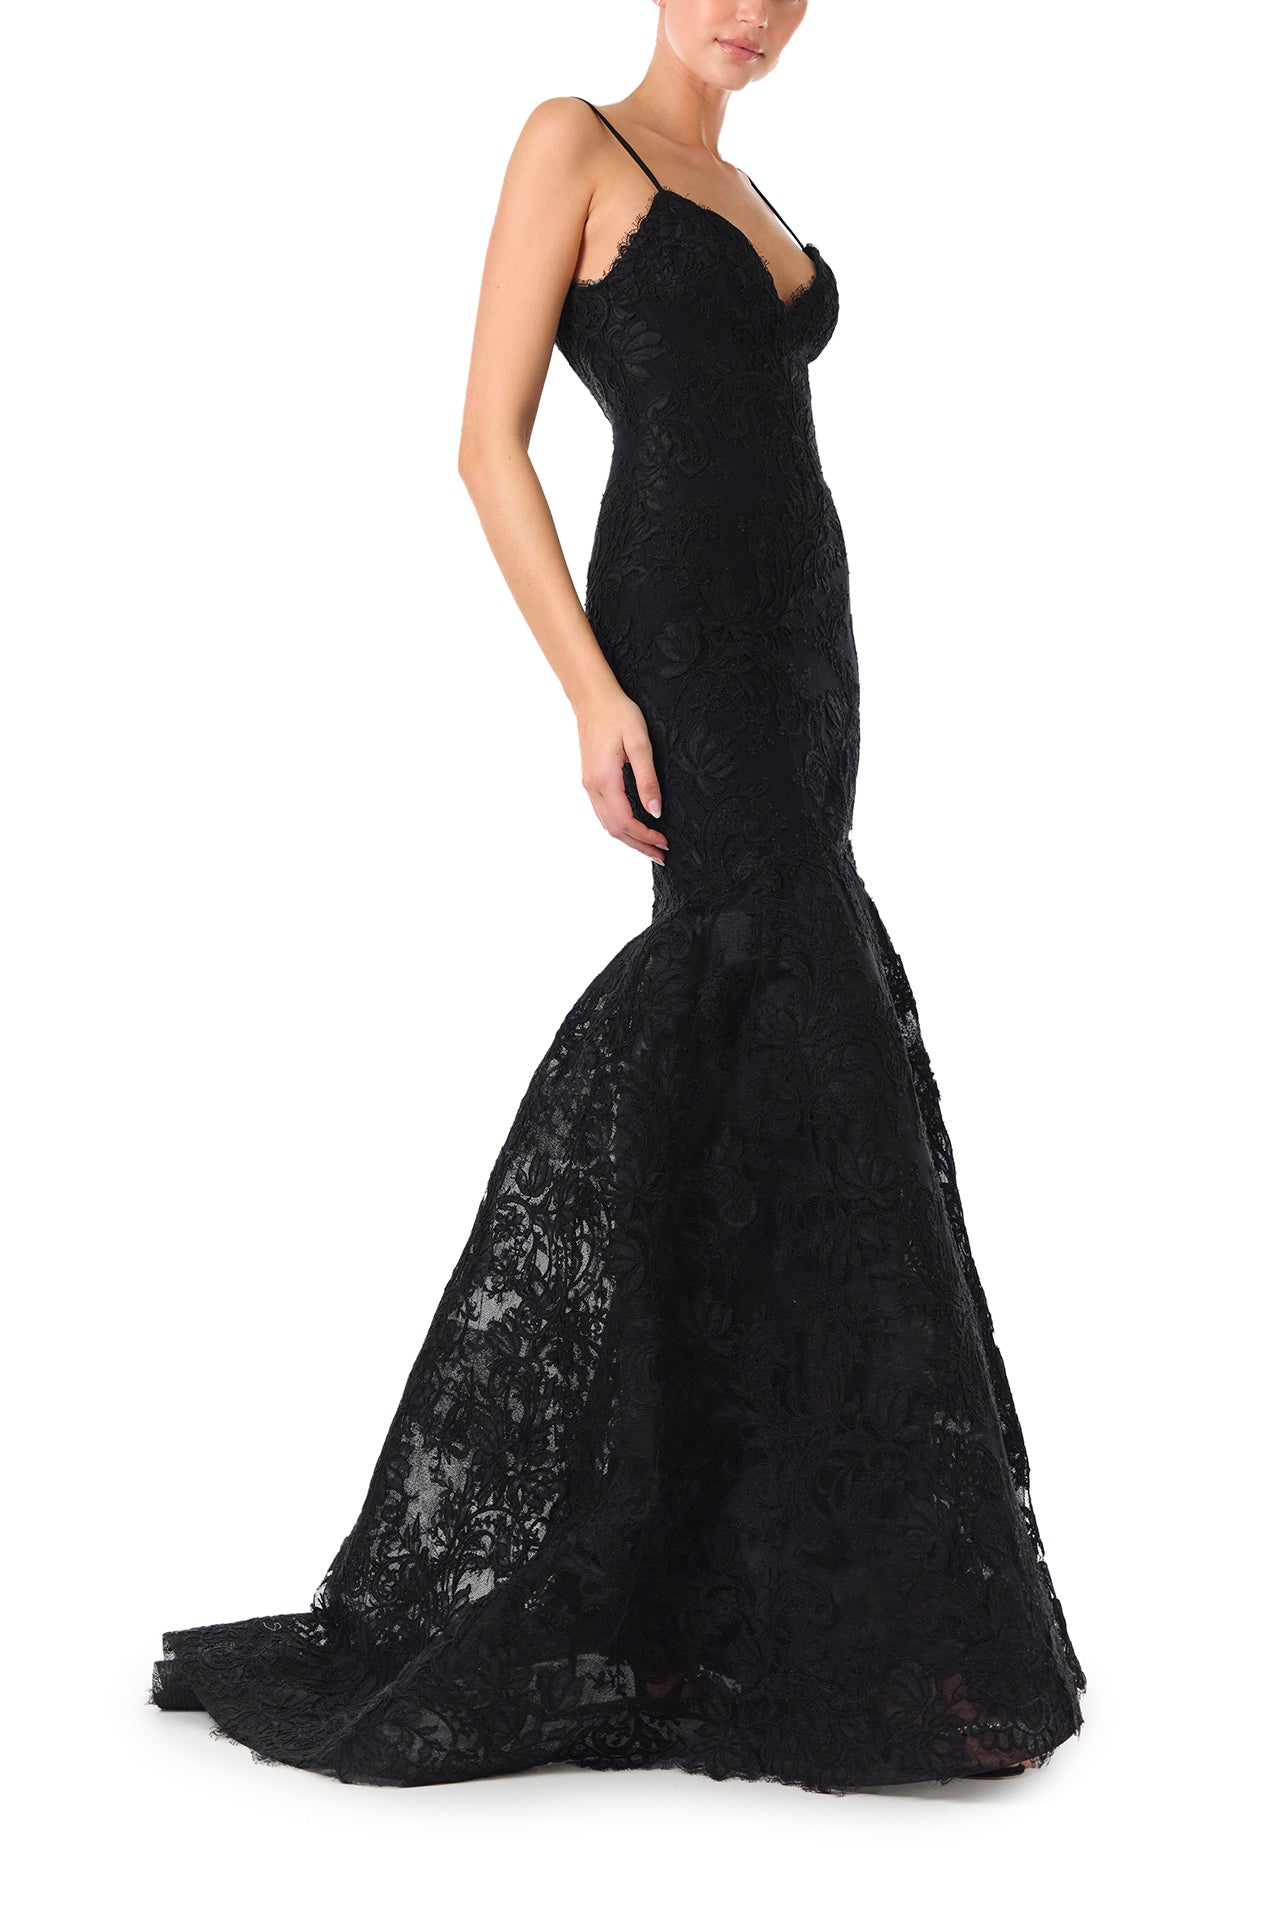 Monique Lhuillier Fall 2024 black lace, off-the-shoulder, draped gown with soft v-neck, spaghetti straps and caged trumpet skirt - right side.